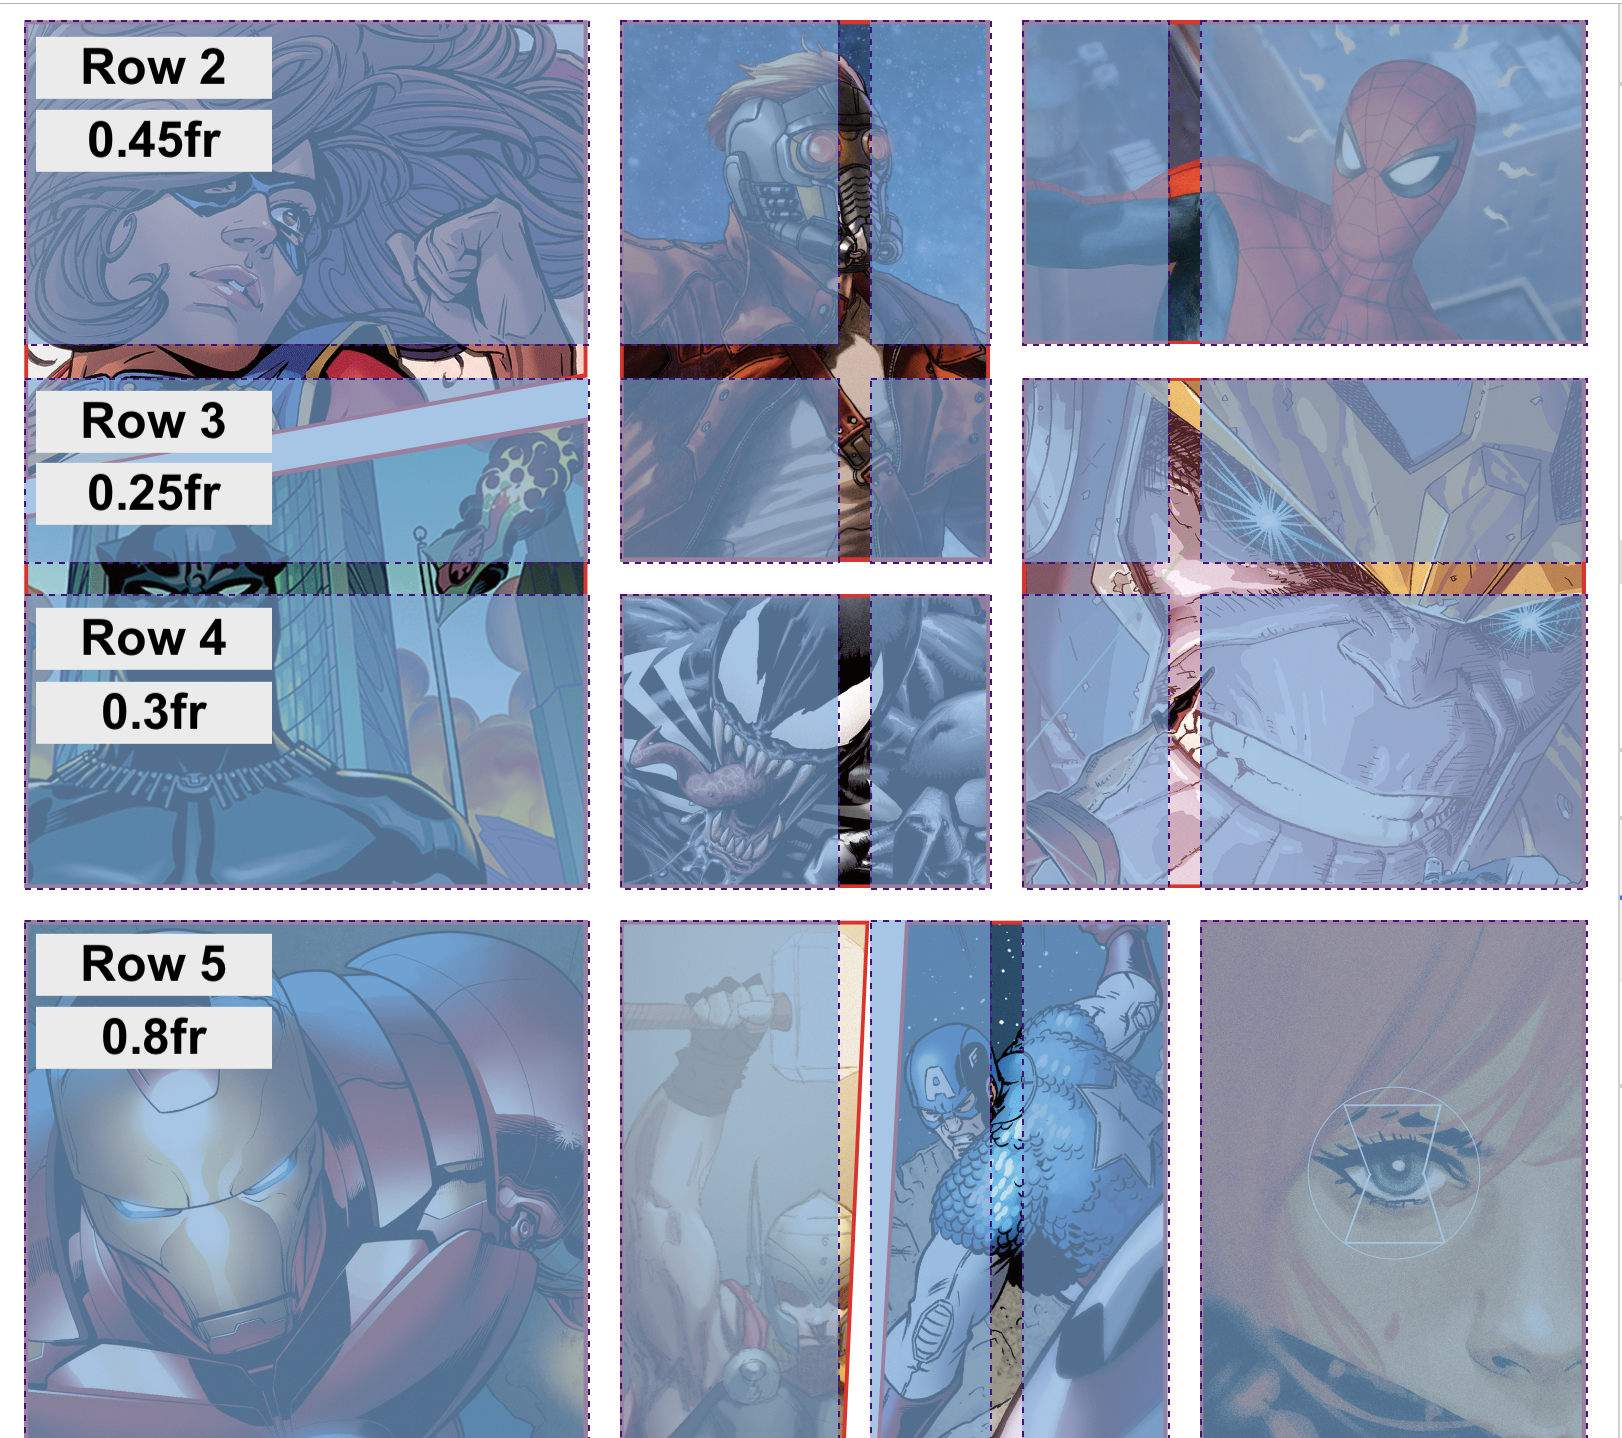 Marvel site with rows highlighted